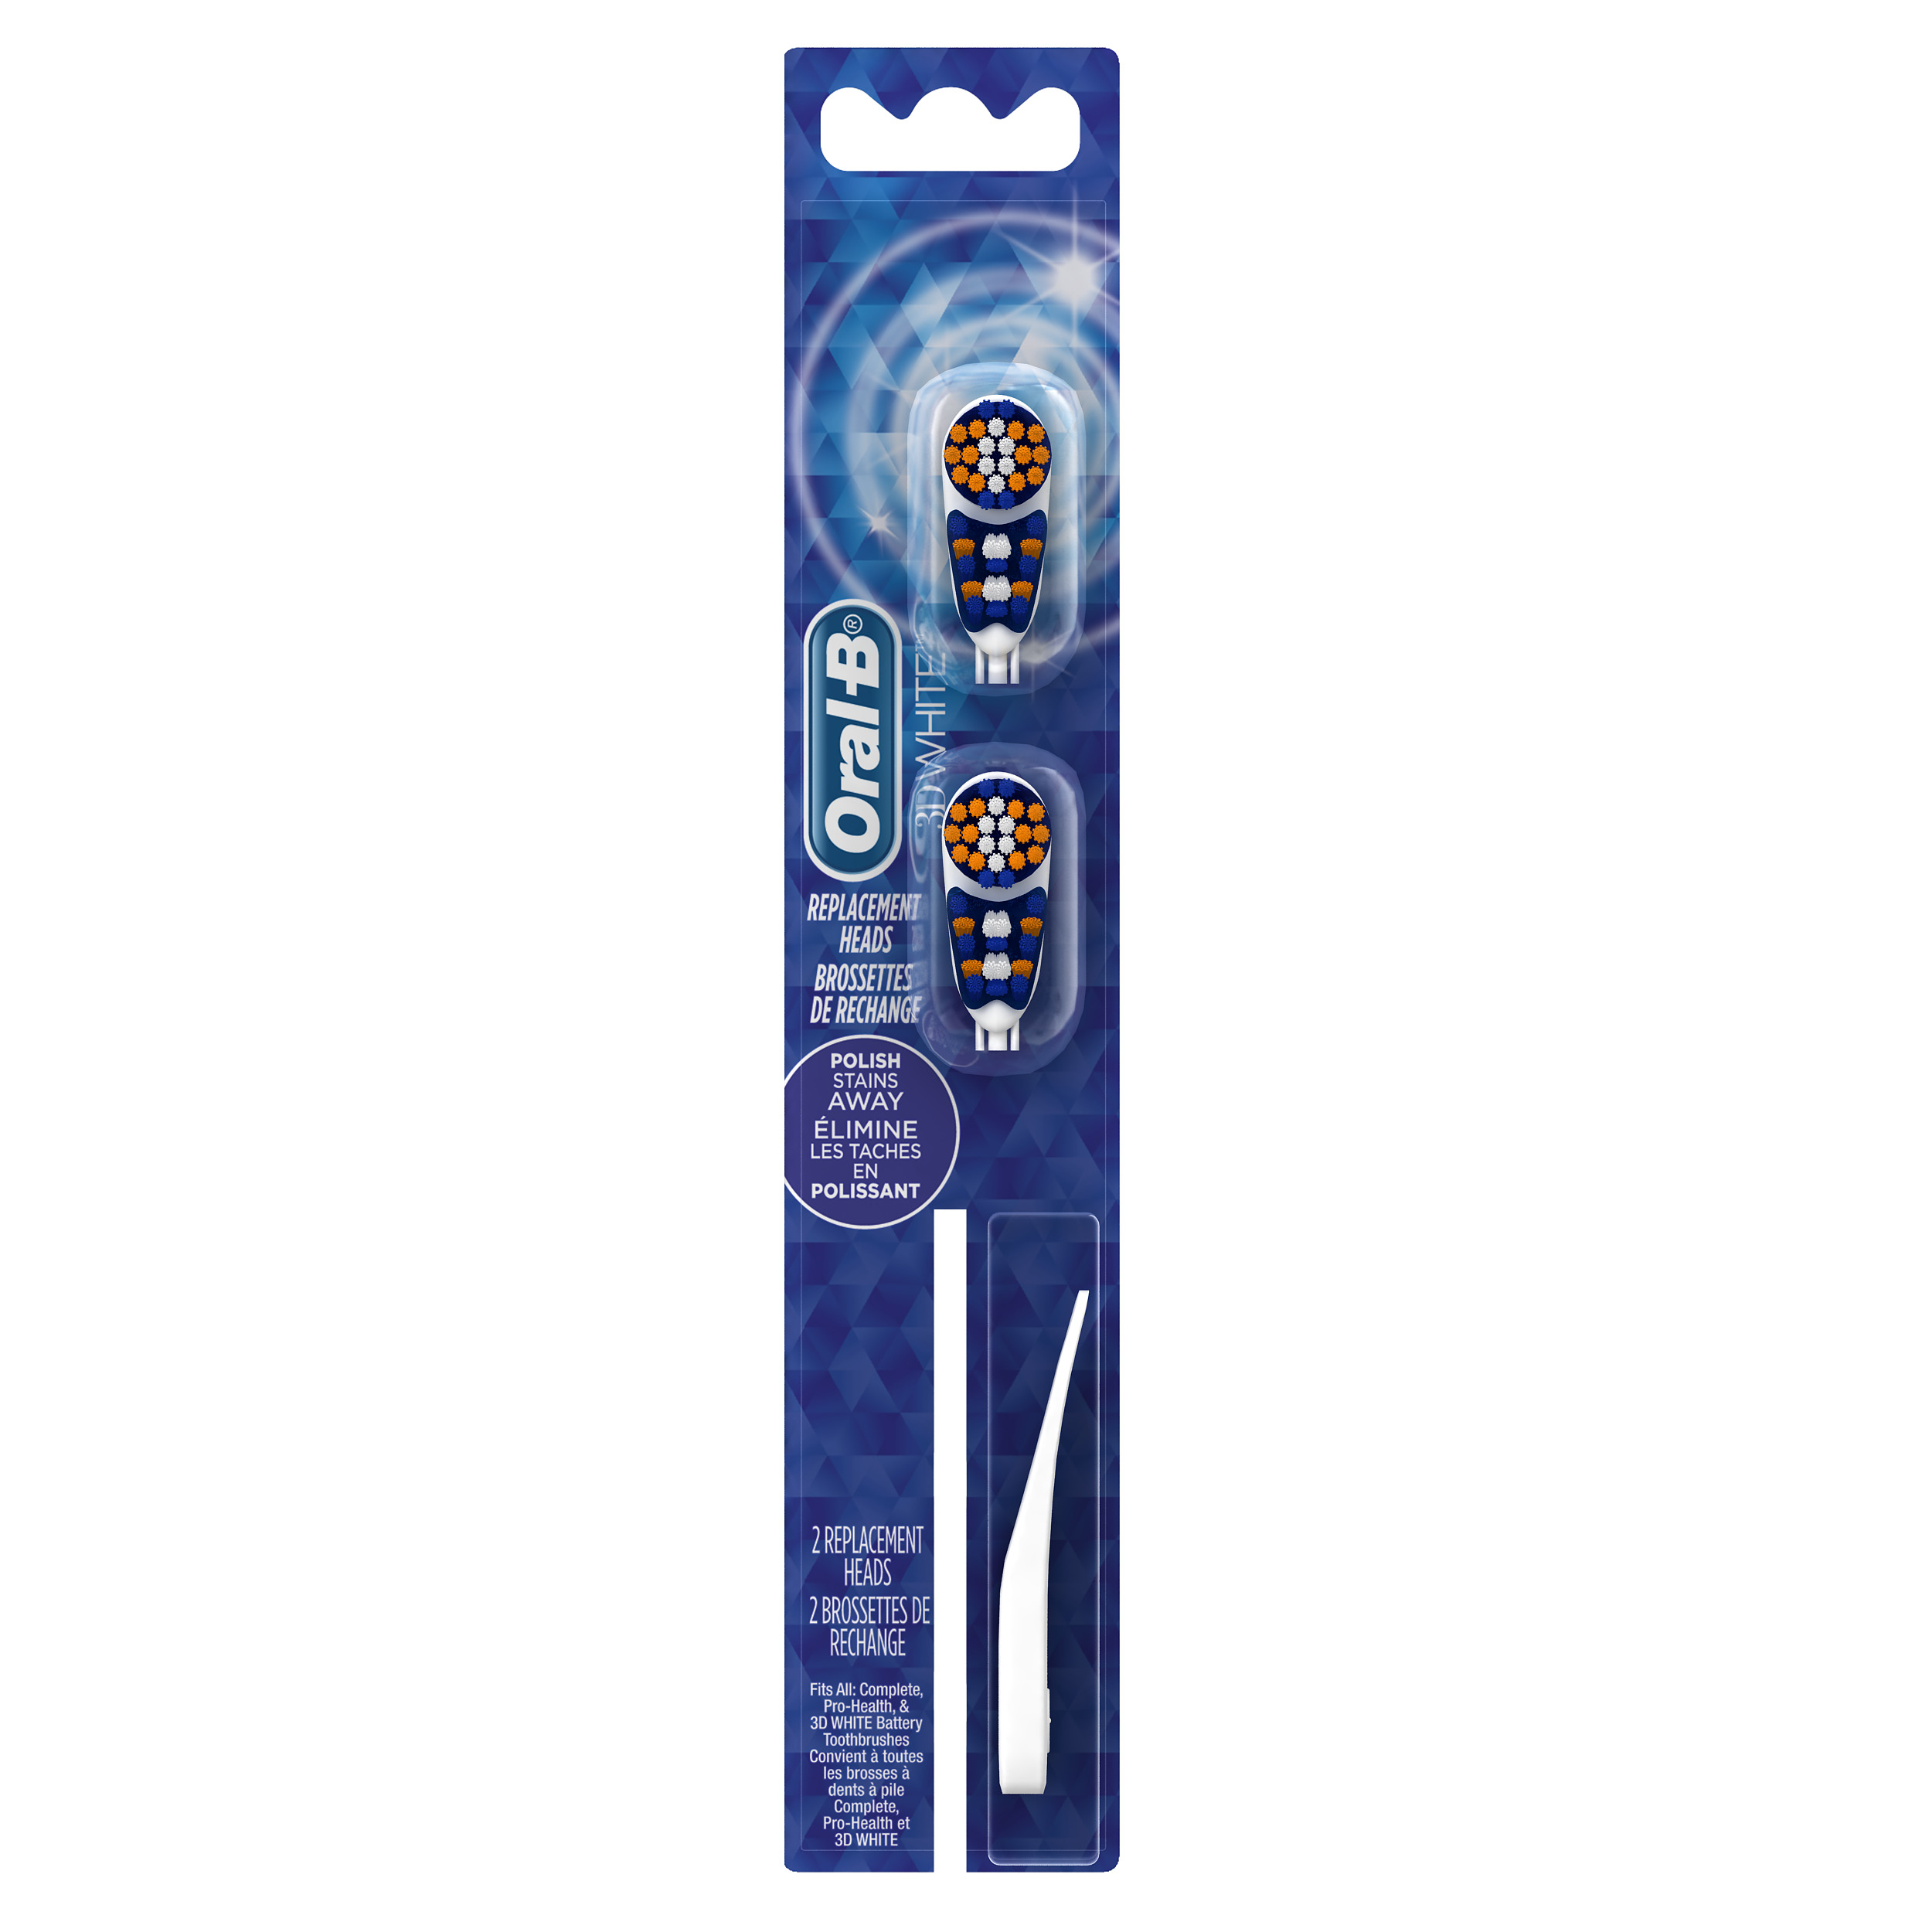 Oral-B 3D White Battery Electric Toothbrush, White, 2 Ct - image 1 of 7